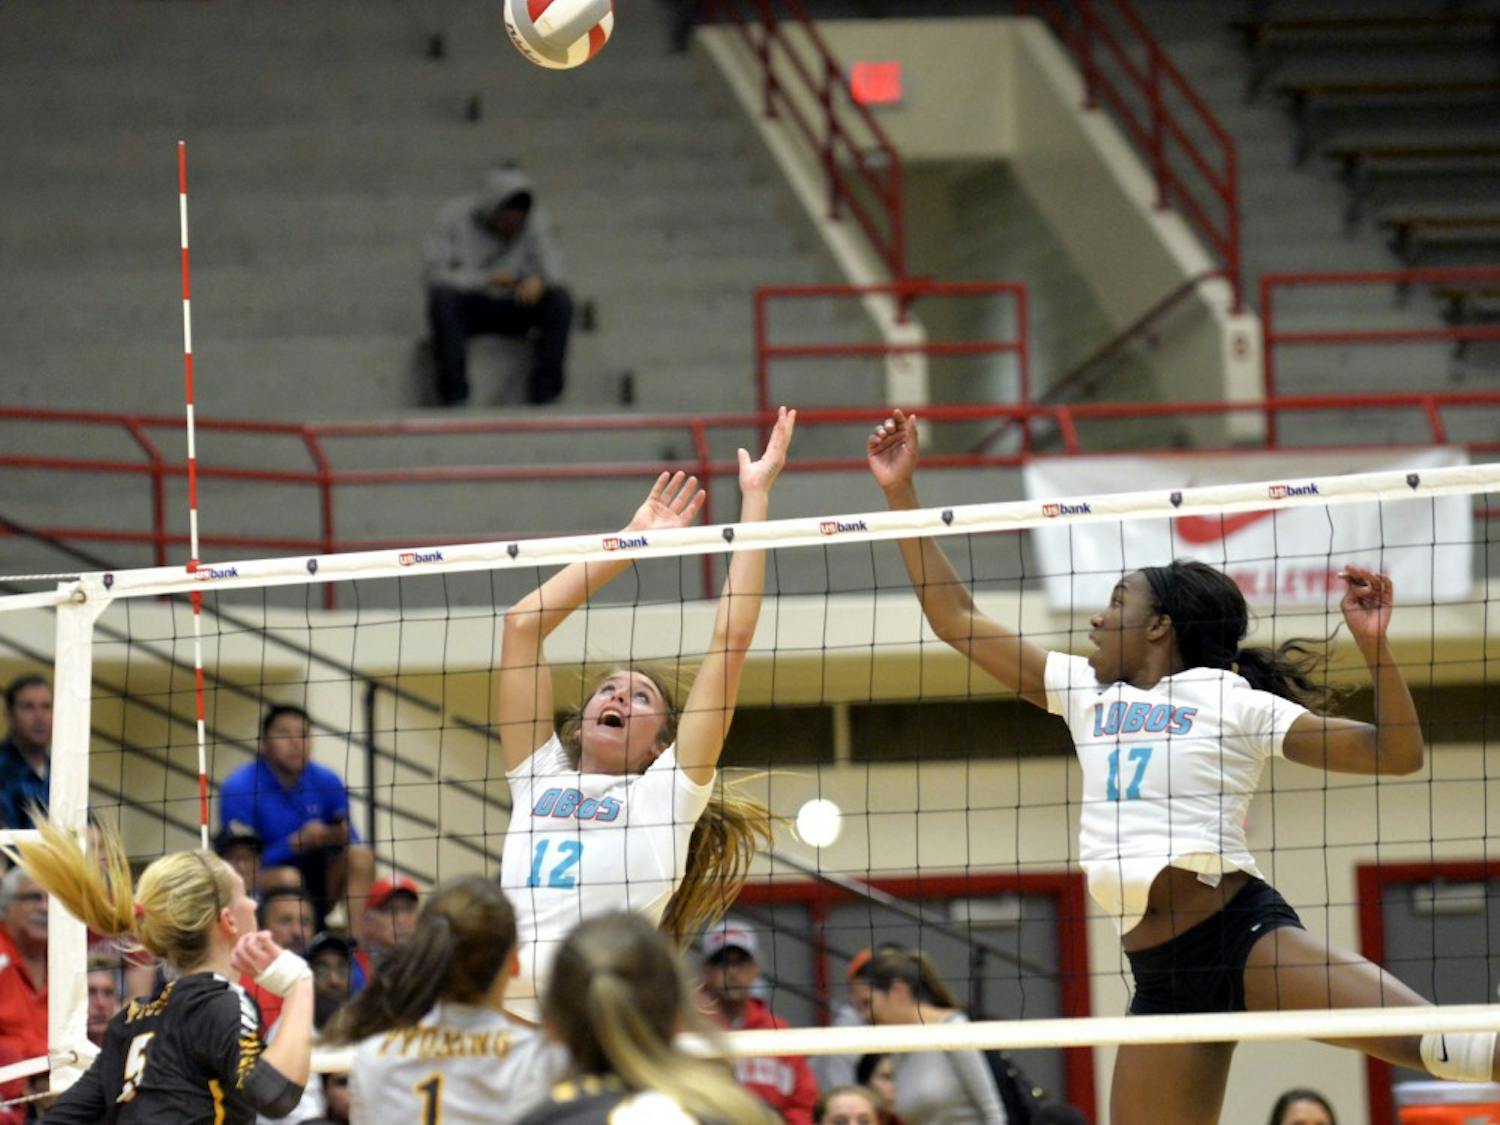 Cassie House (12) and Skye Gullatt (17) leap to knock down Wyoming's overpass at Johnson Center Thursday night. The Lobos lost to Wyoming 3-2.